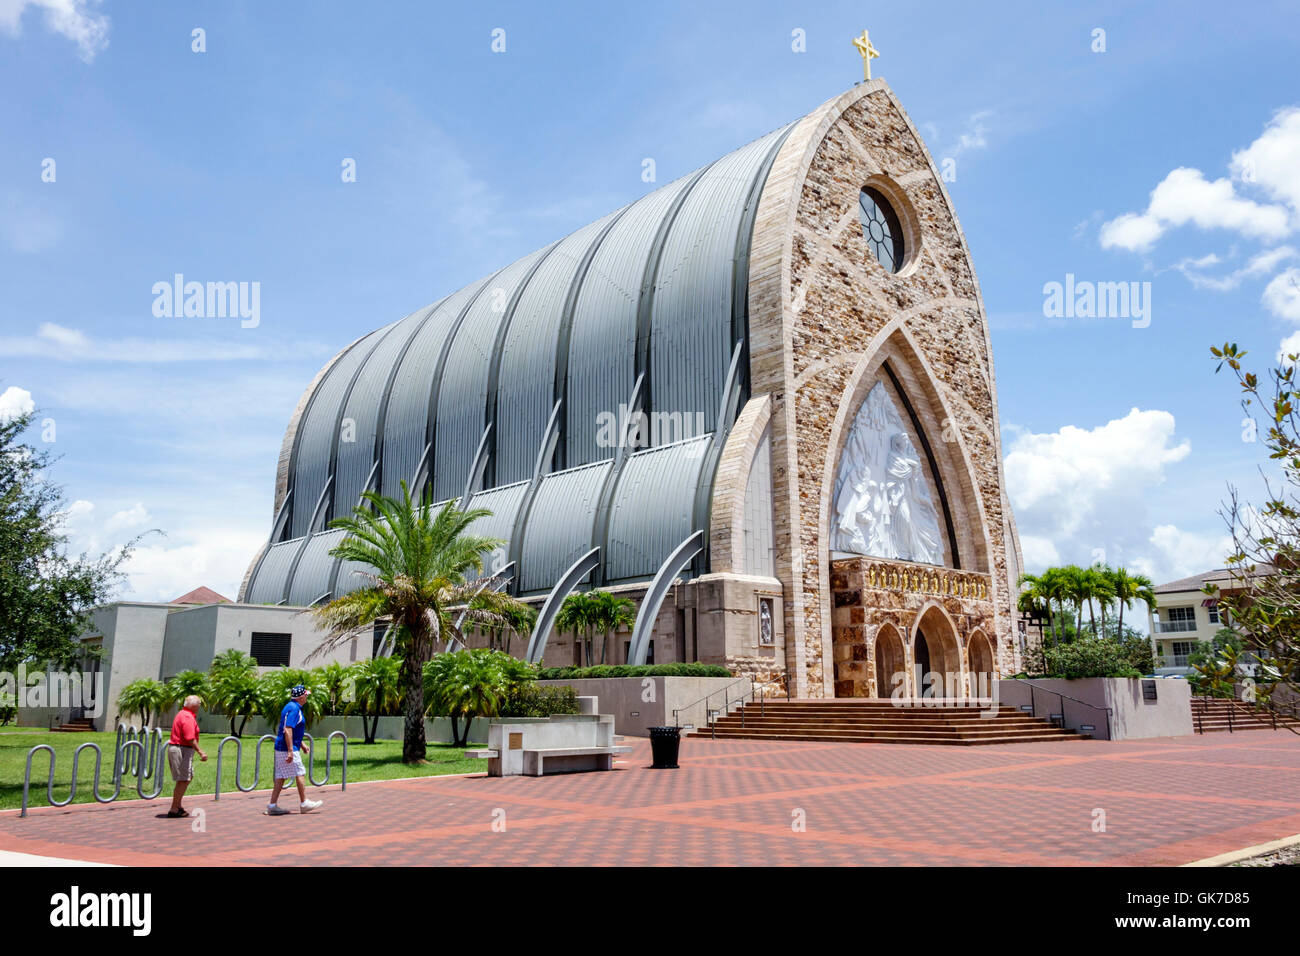 Florida Collier County,Ave Maria,Ave Maria University,planned college town,Tom Monaghan,Ave Maria Oratory,church,Roman Catholic,religion,education,Mar Stock Photo